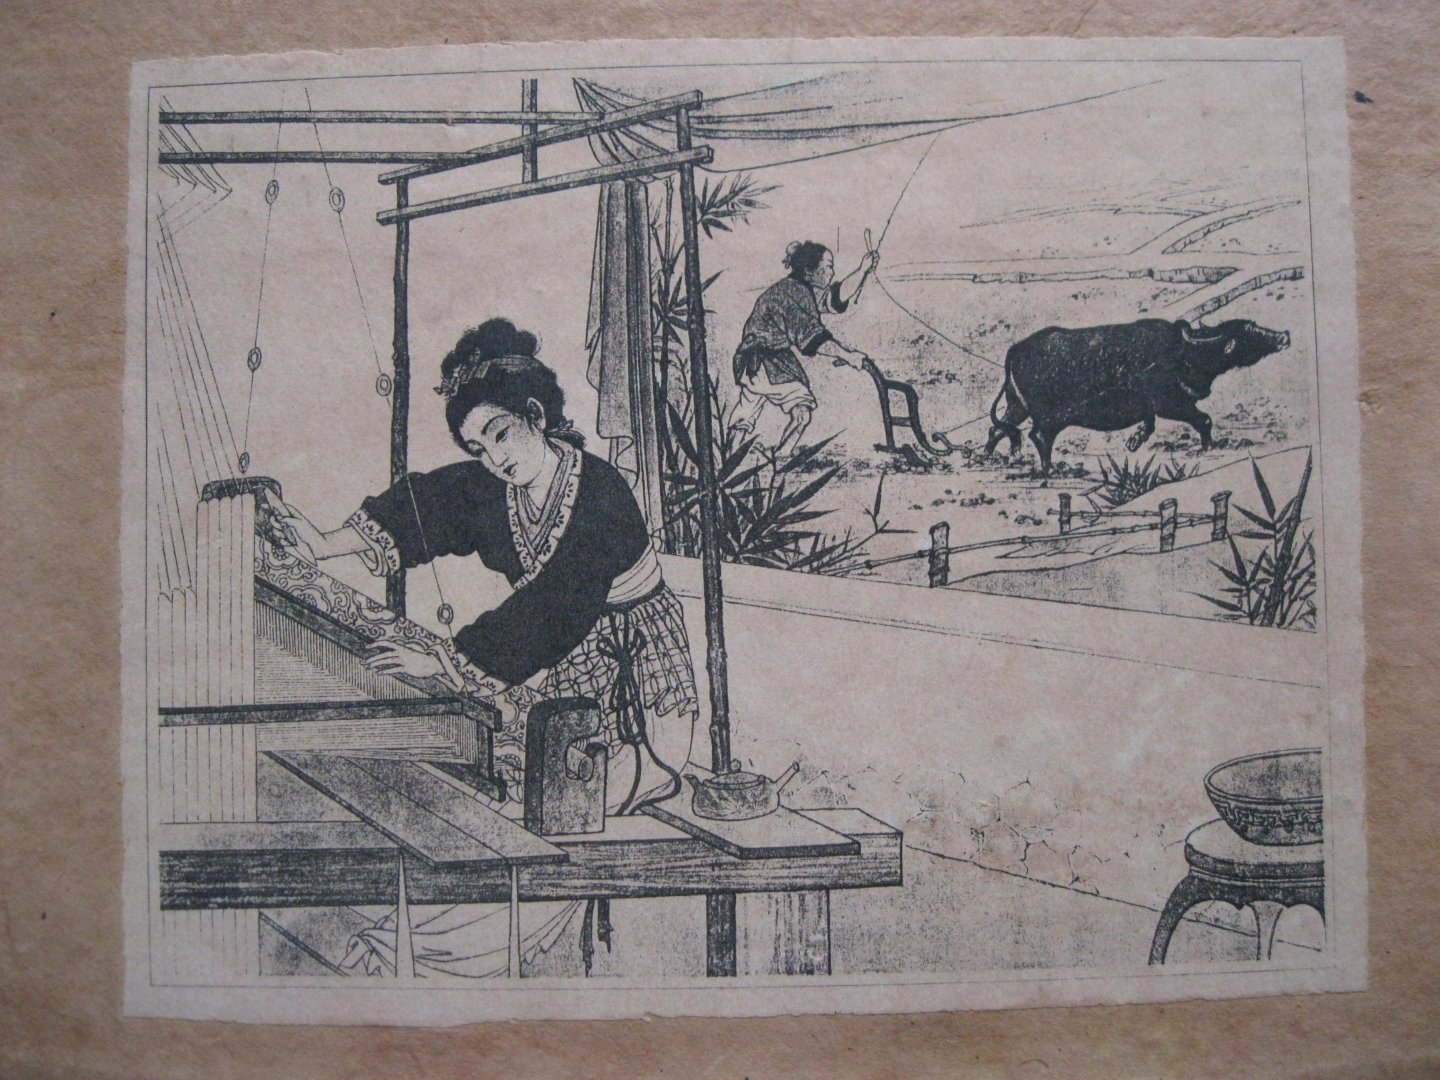 Chinese folk tale - The cowherd and the weaver girl